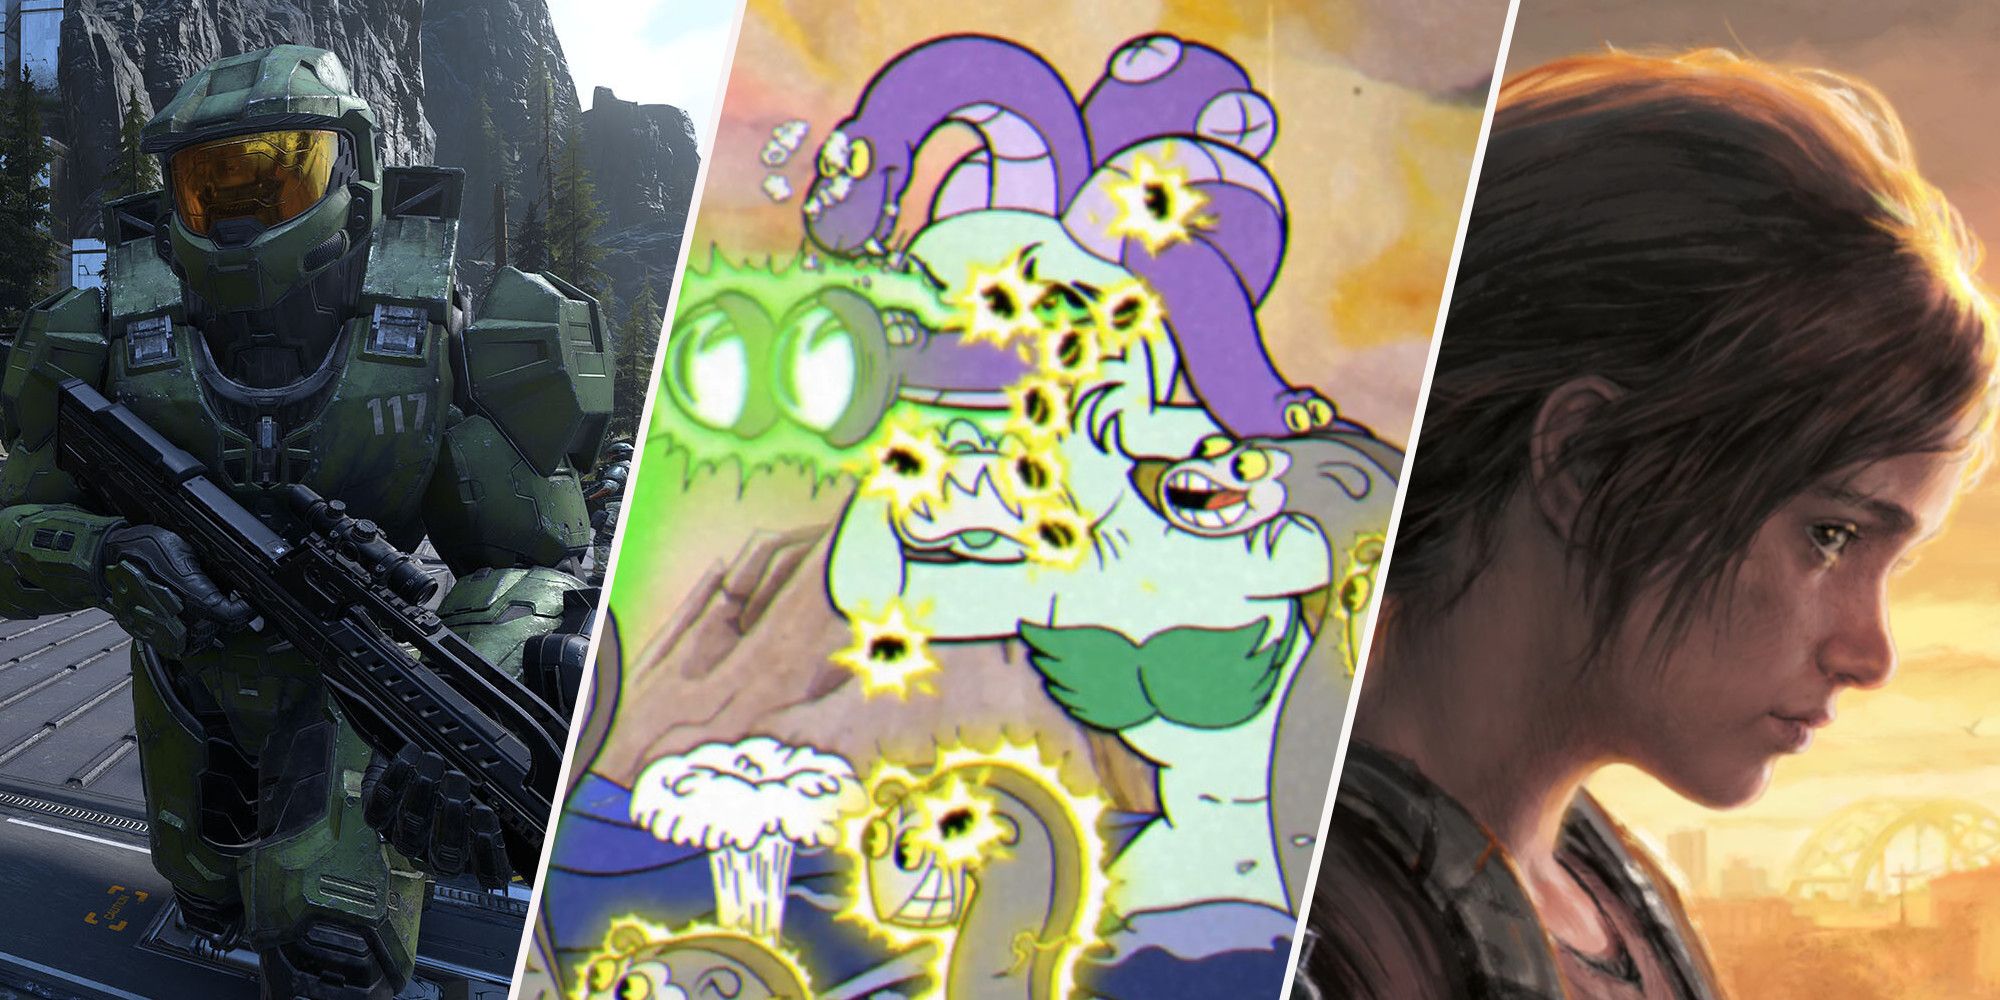 Master Cheif Running to camera, cuphead boss attack, and Ellie looking into distance